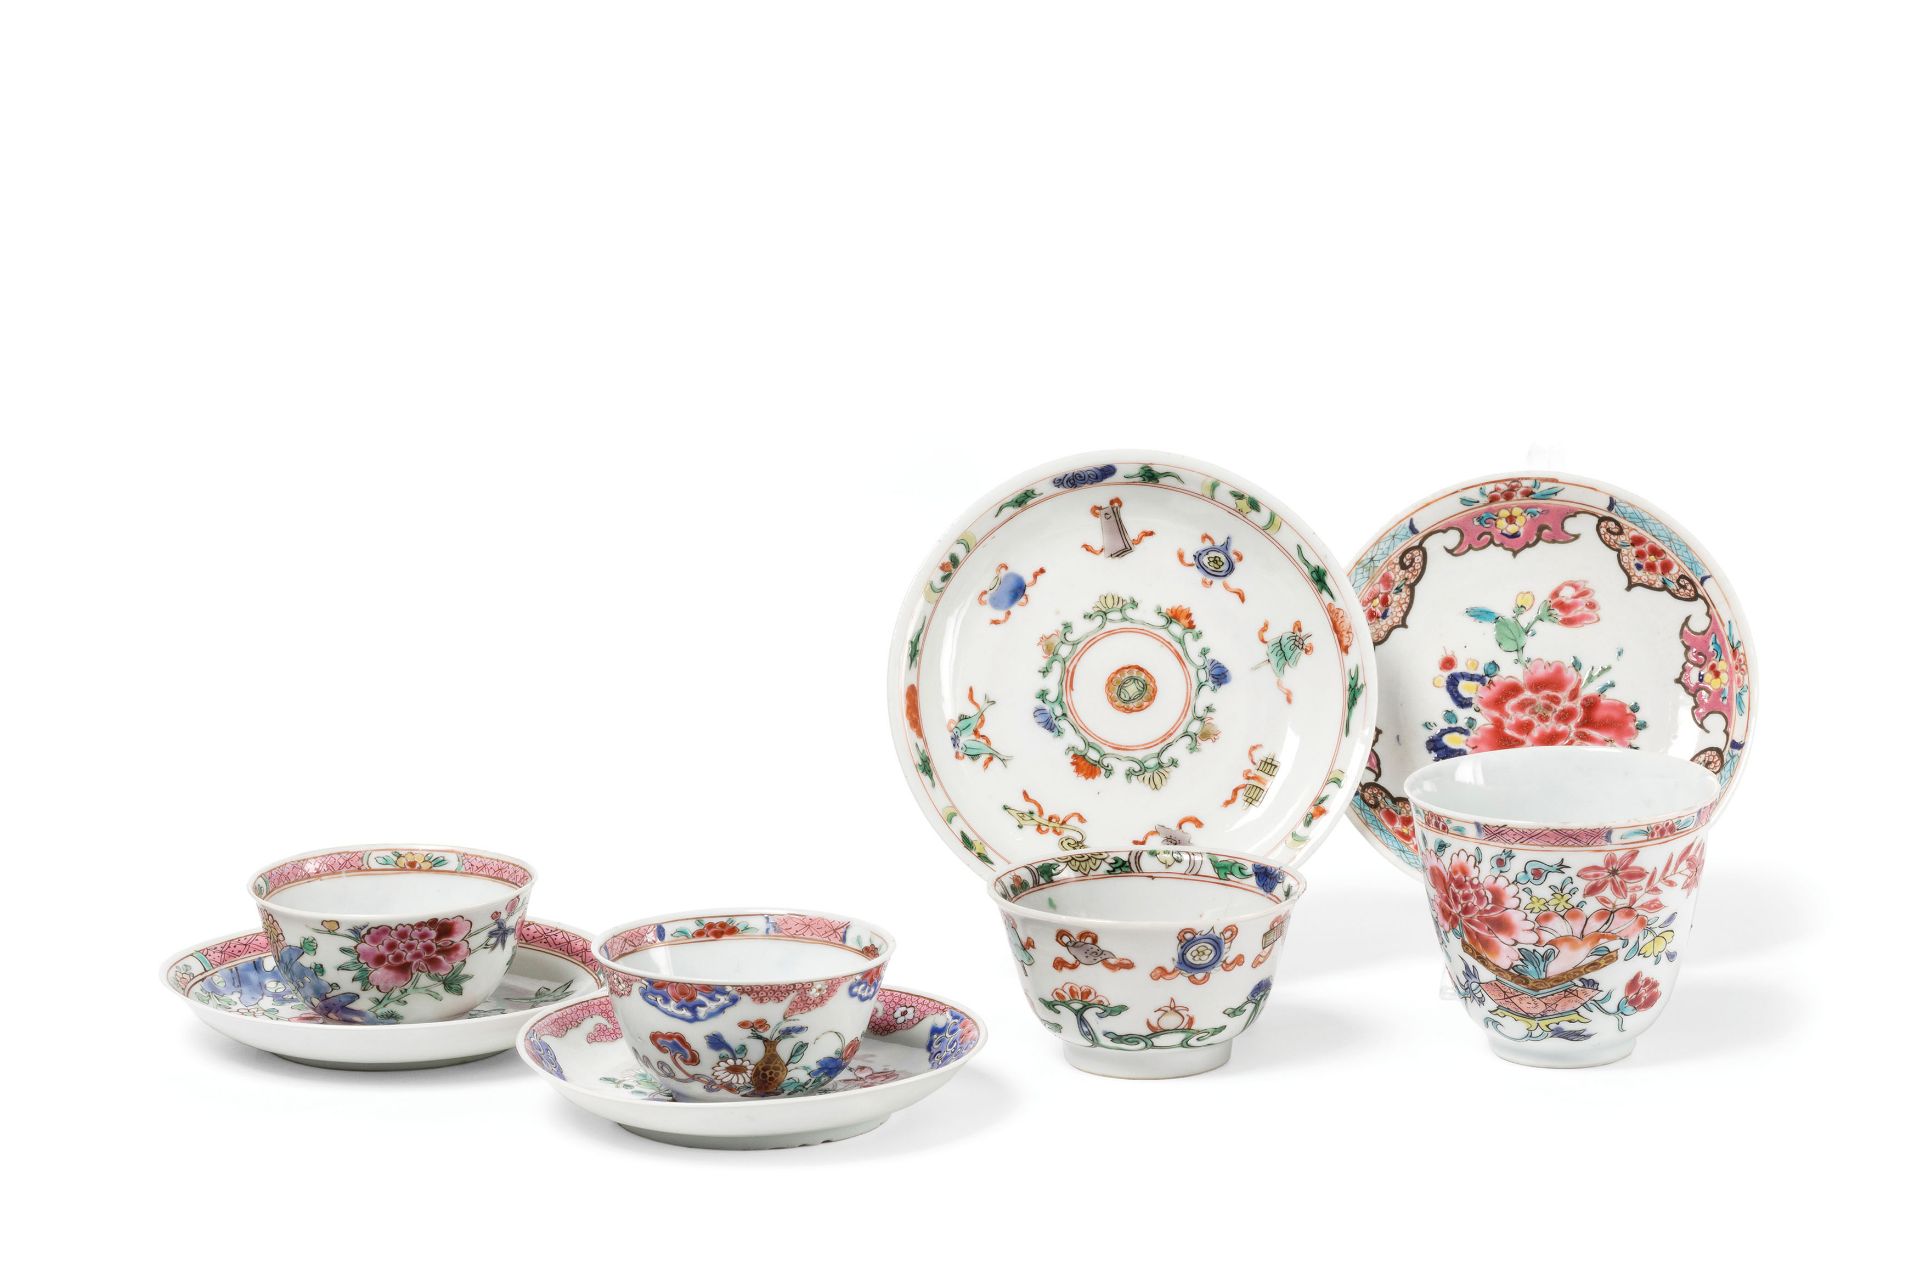 THREE FAMILLE ROSE PORCELAIN CUPS AND SAUCERS AND A FAMILLE VERTE CUP AND SAUCER, CHINA,